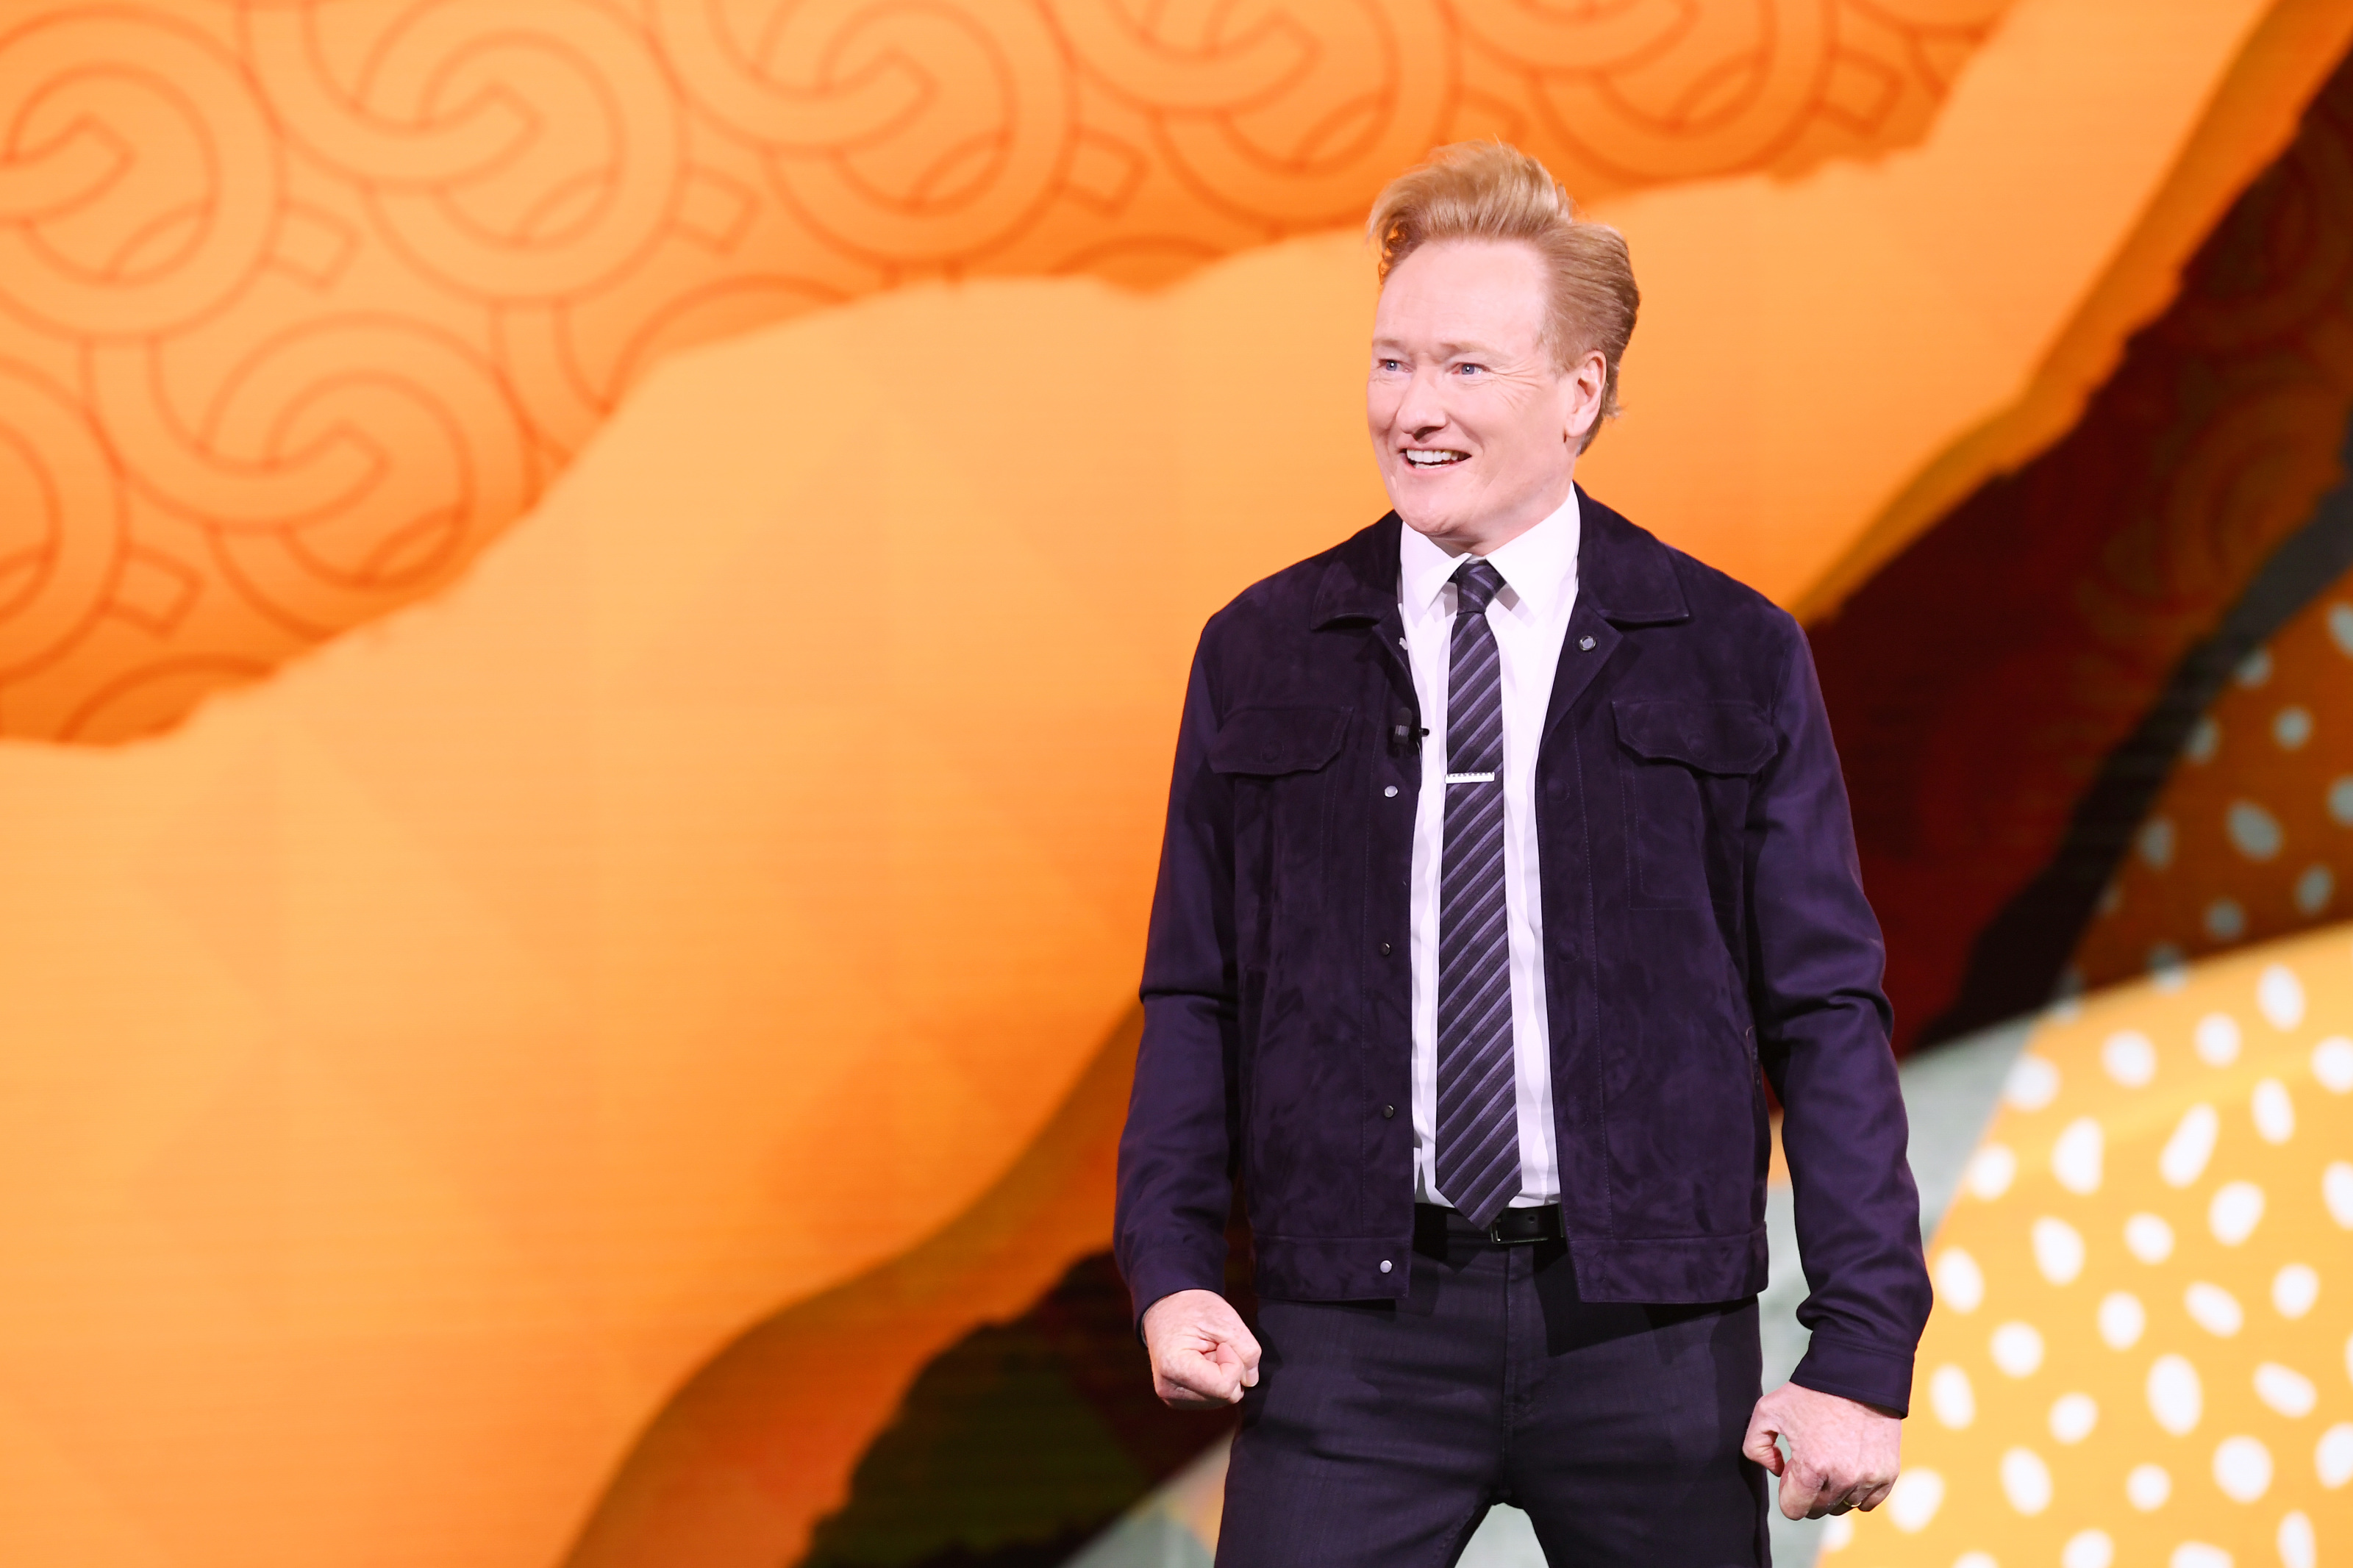 Conan O'Brien's best moments, as shared by staff and celebrities